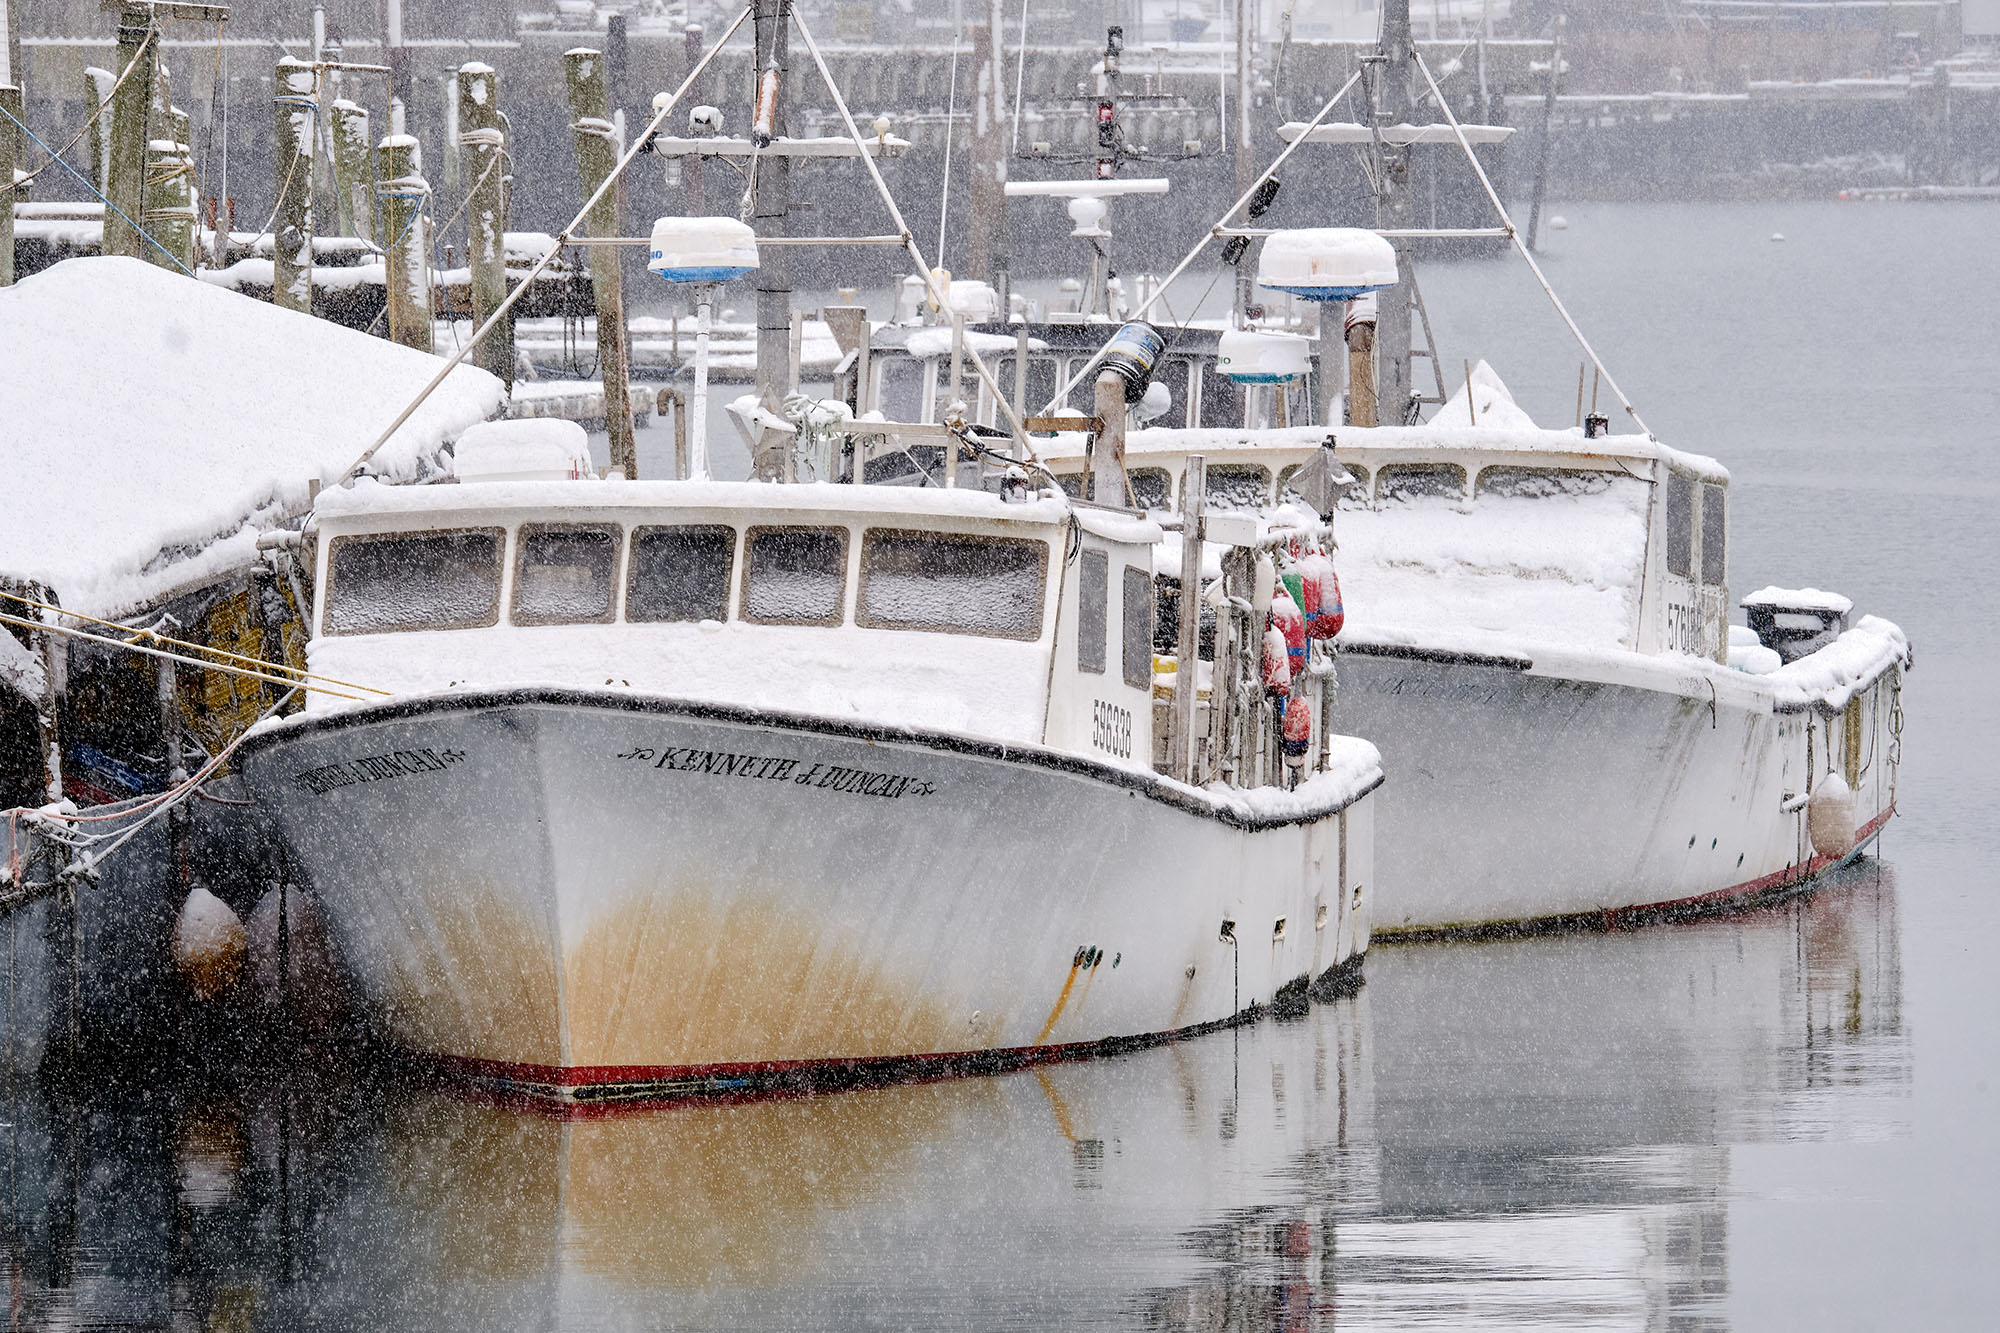 Lobster boats in the snow